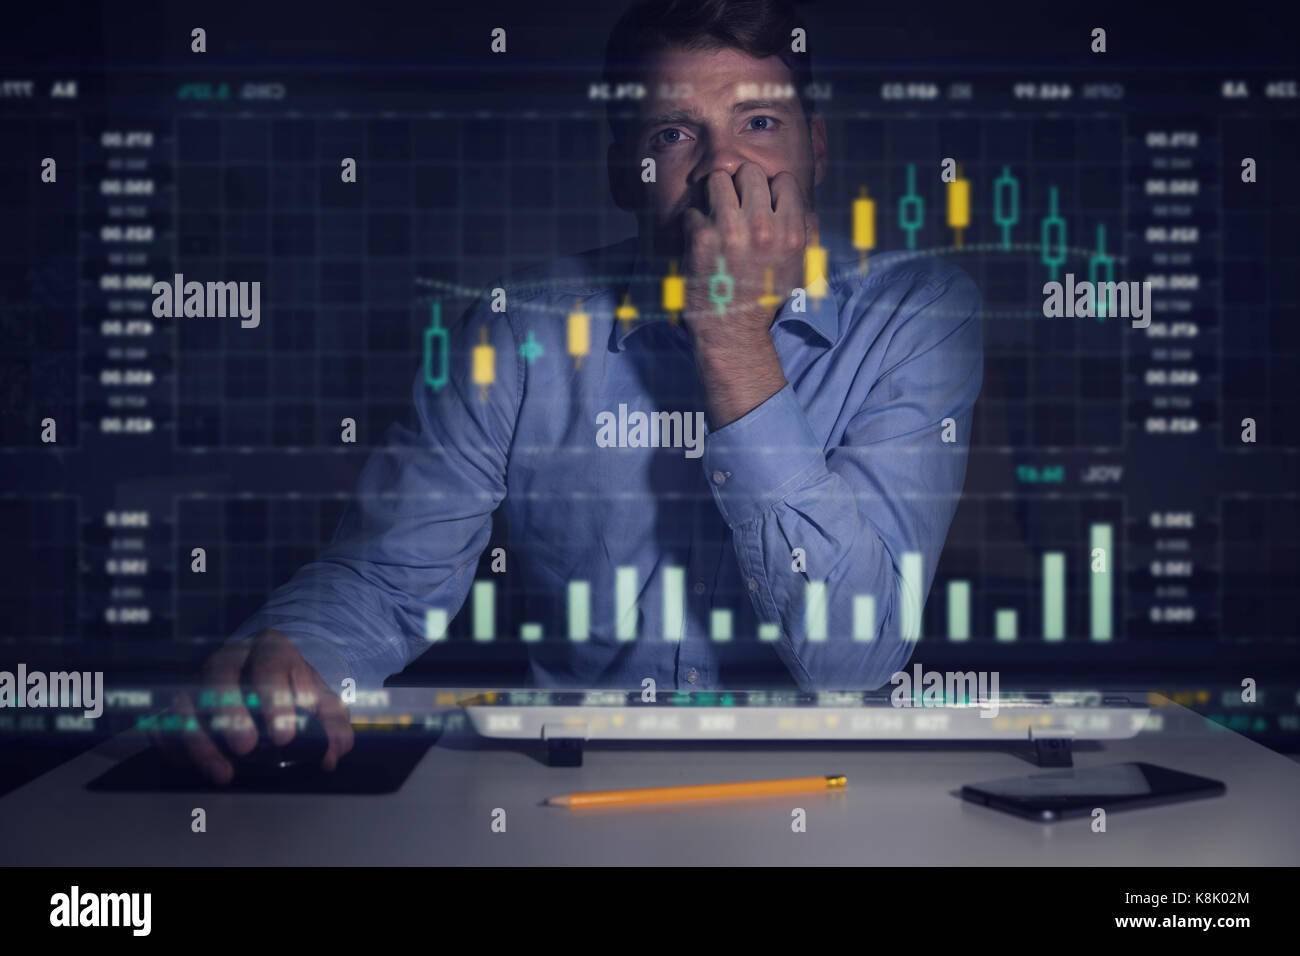 businessman analyzing stock market graphs and data on computer screen Stock Photo